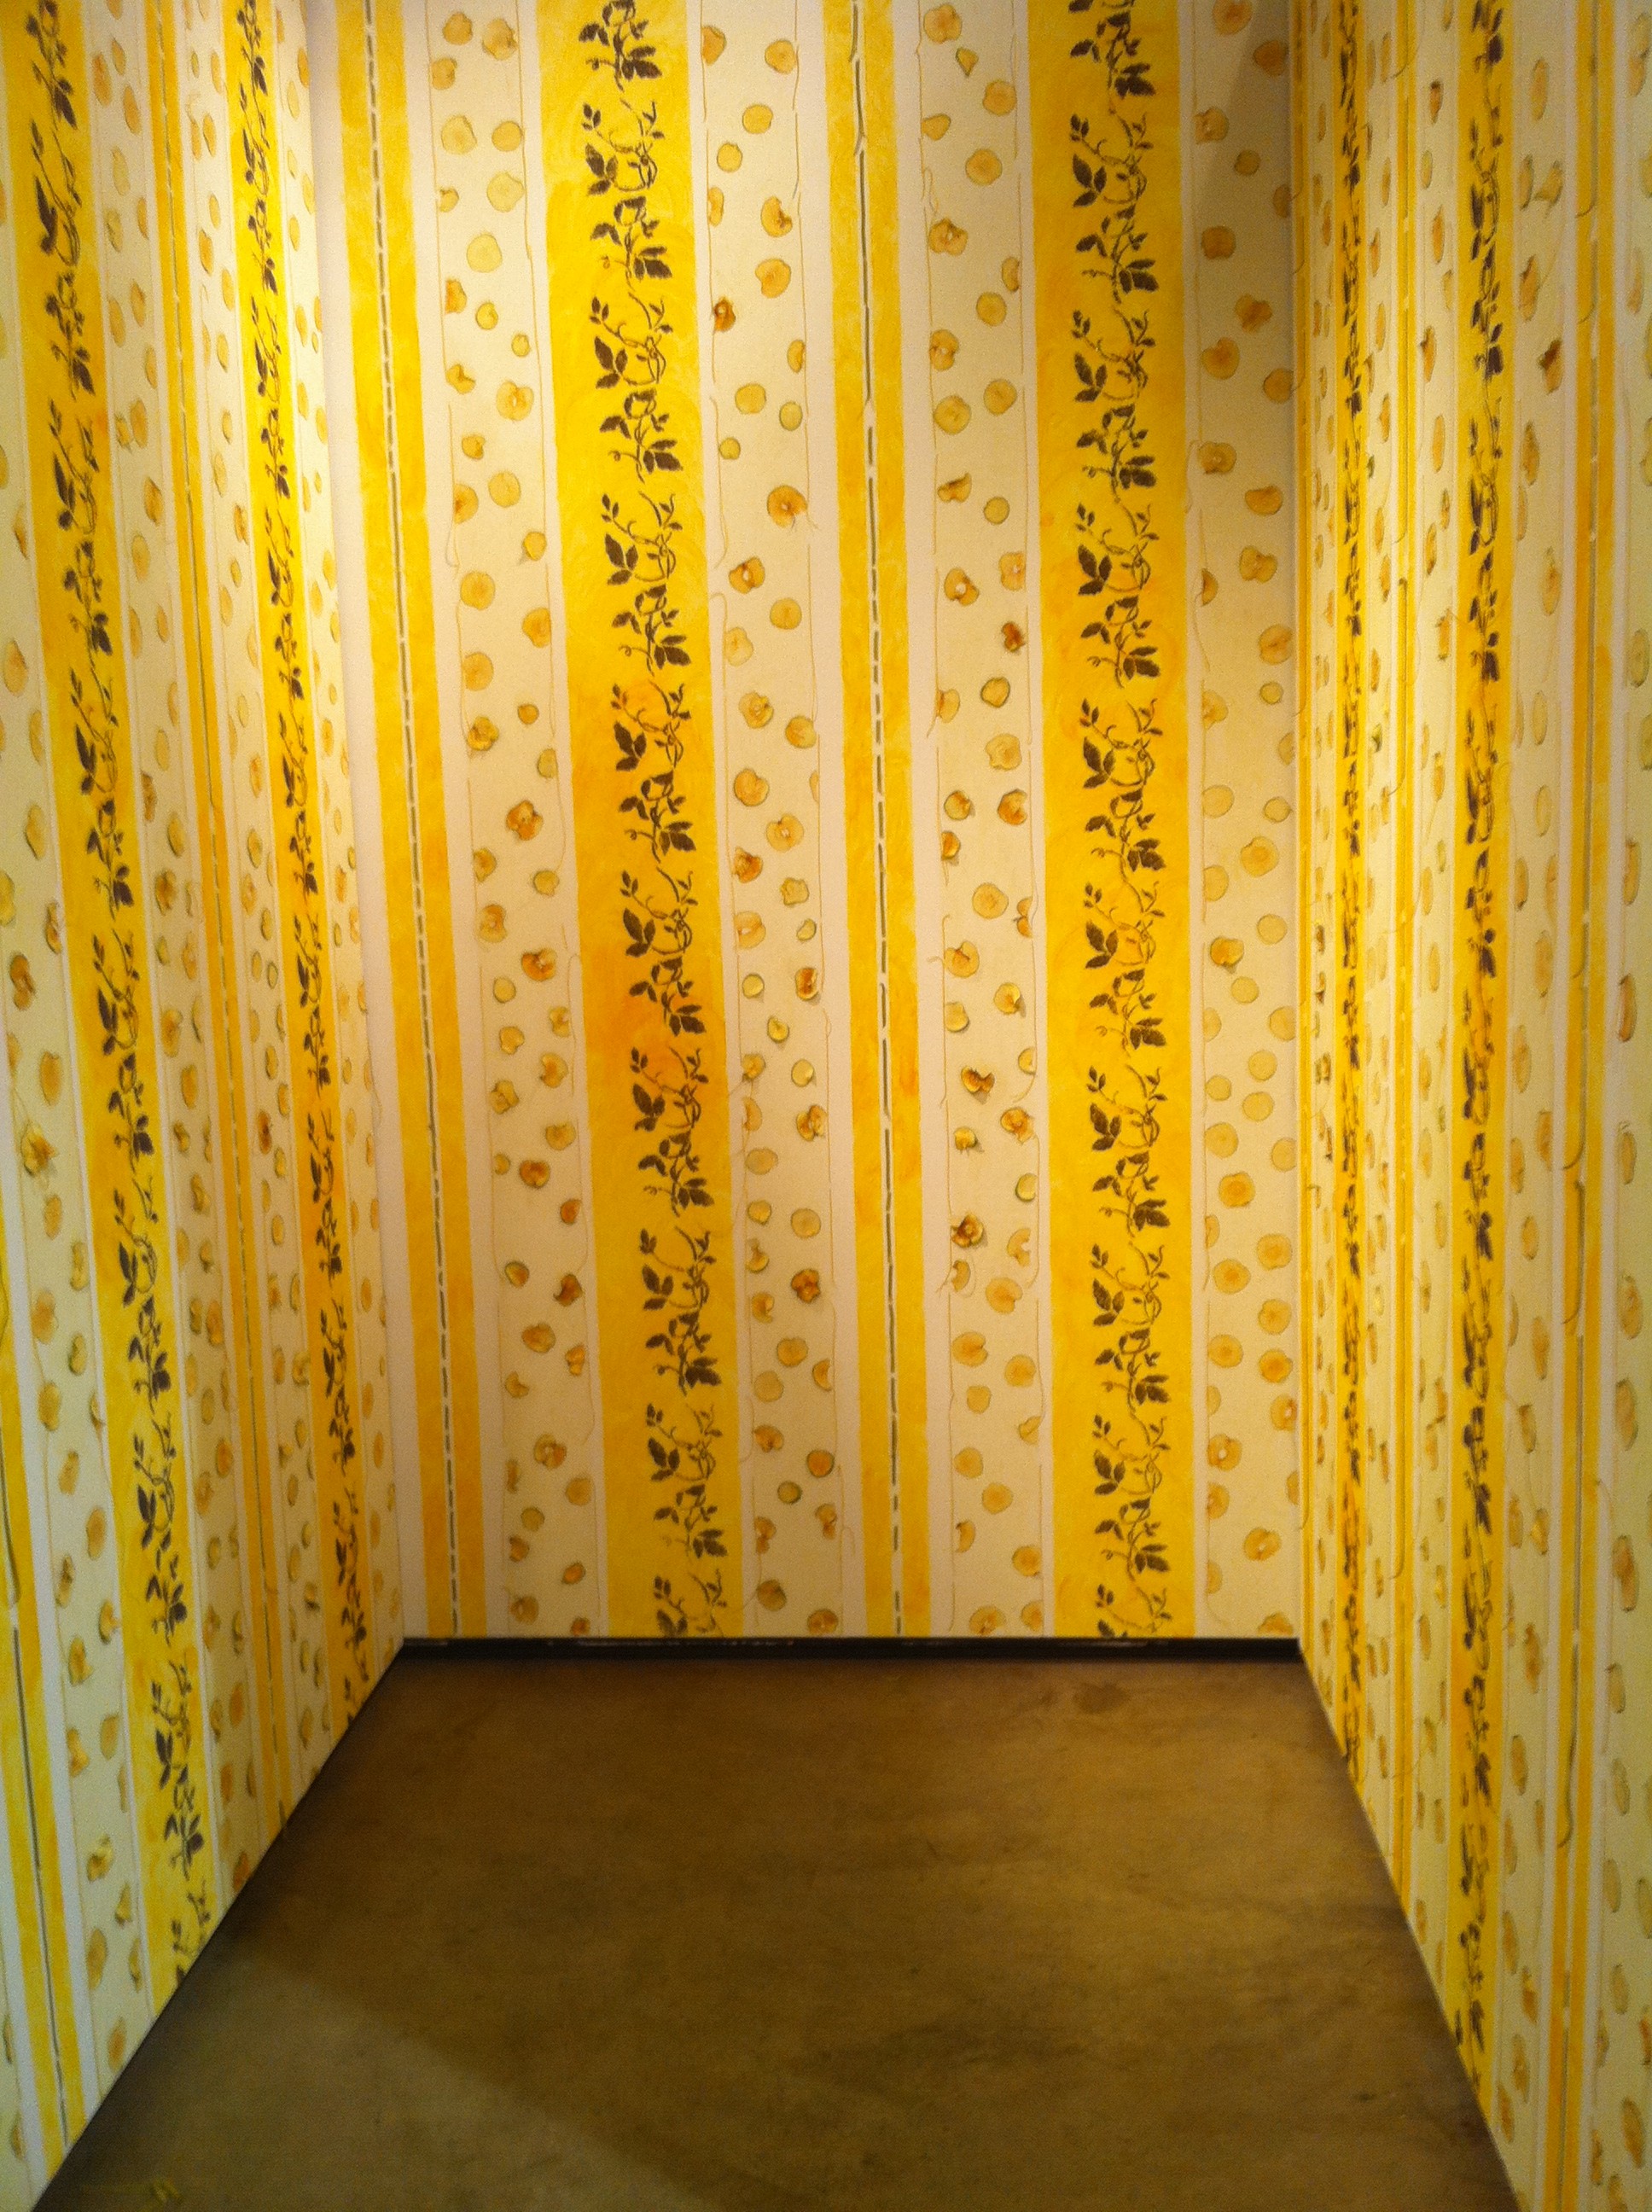 essay on the yellow wallpaper